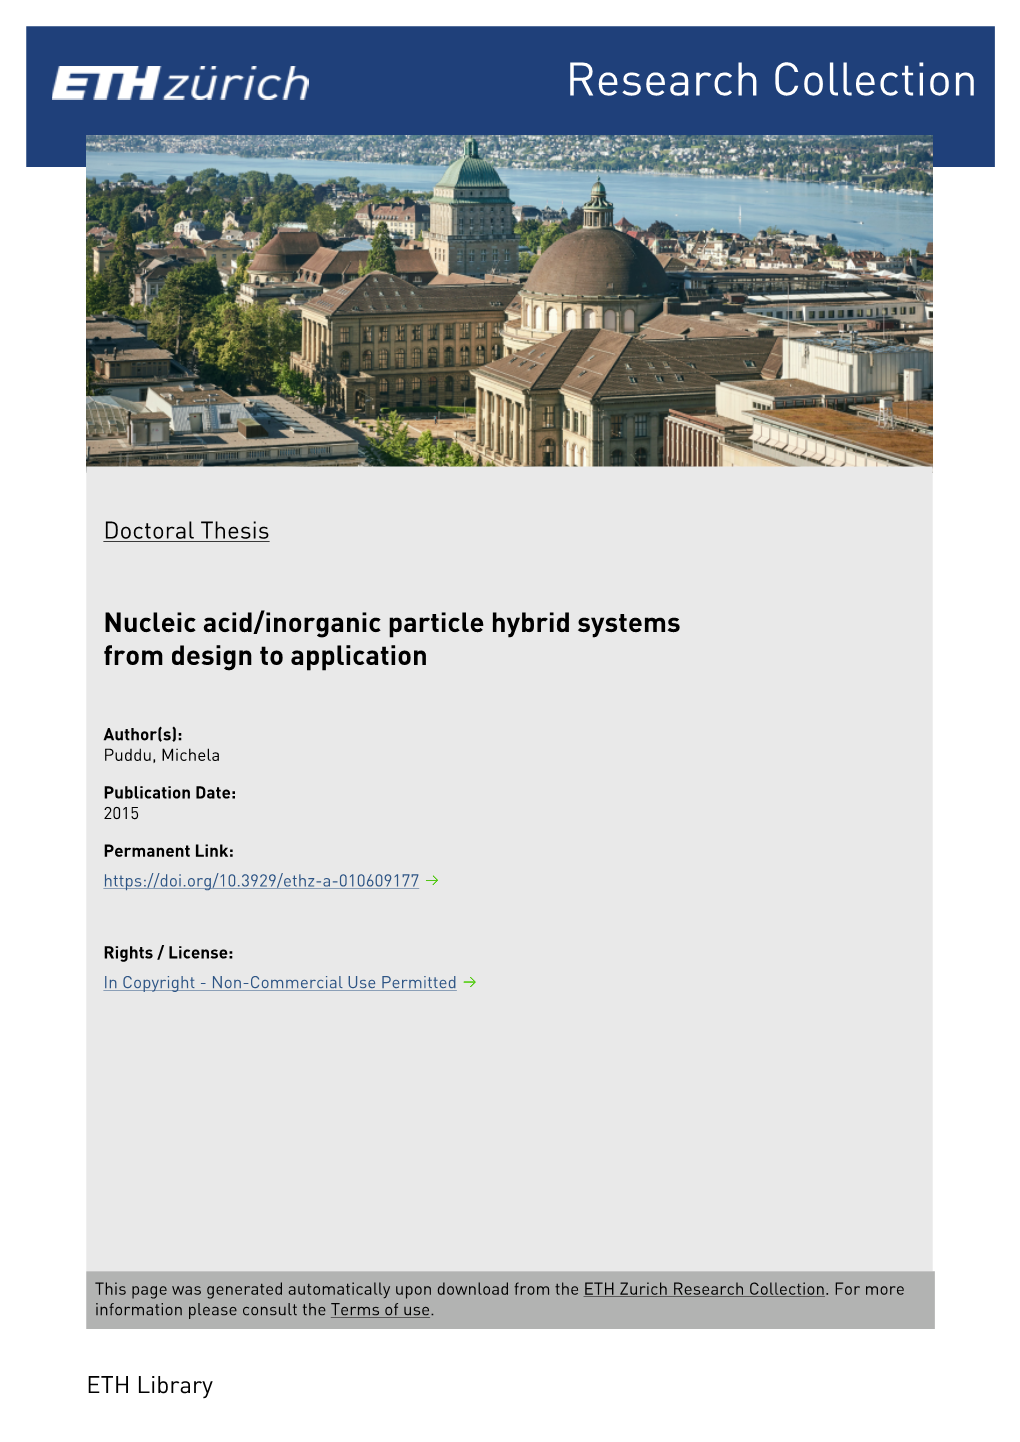 Nucleic Acid/Inorganic Particle Hybrid Systems from Design to Application